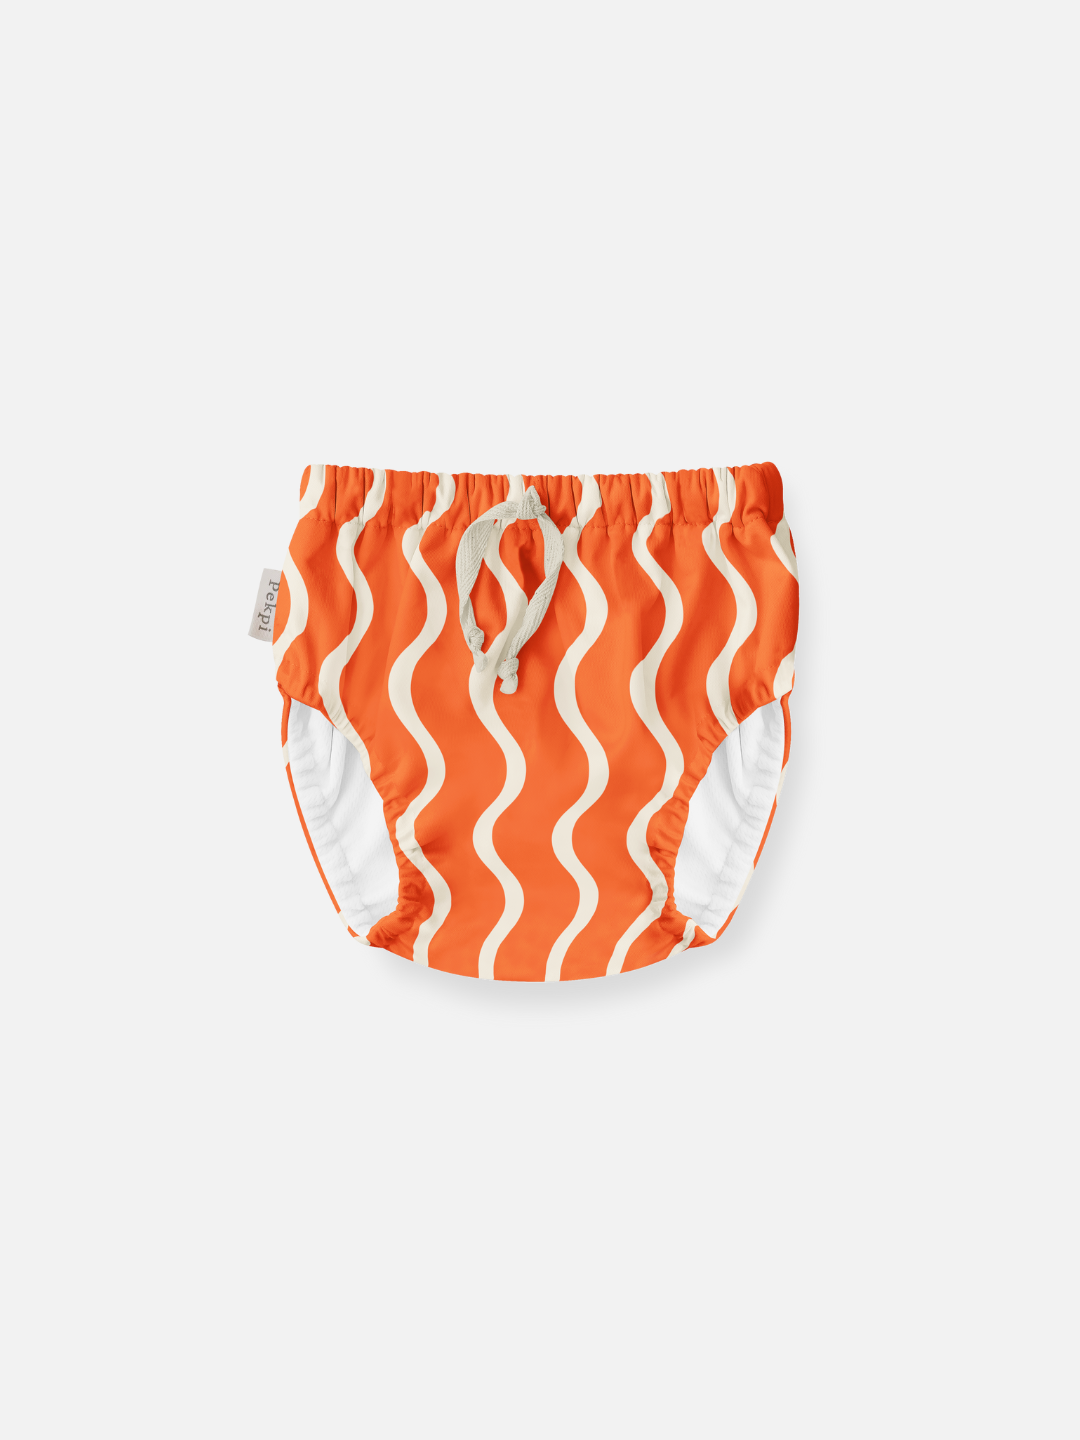 The front view of the swim diaper with an elastic waist with a tie and elastic leg holes. The diaper is a bright orange with wavy and vertical cream colored lines.